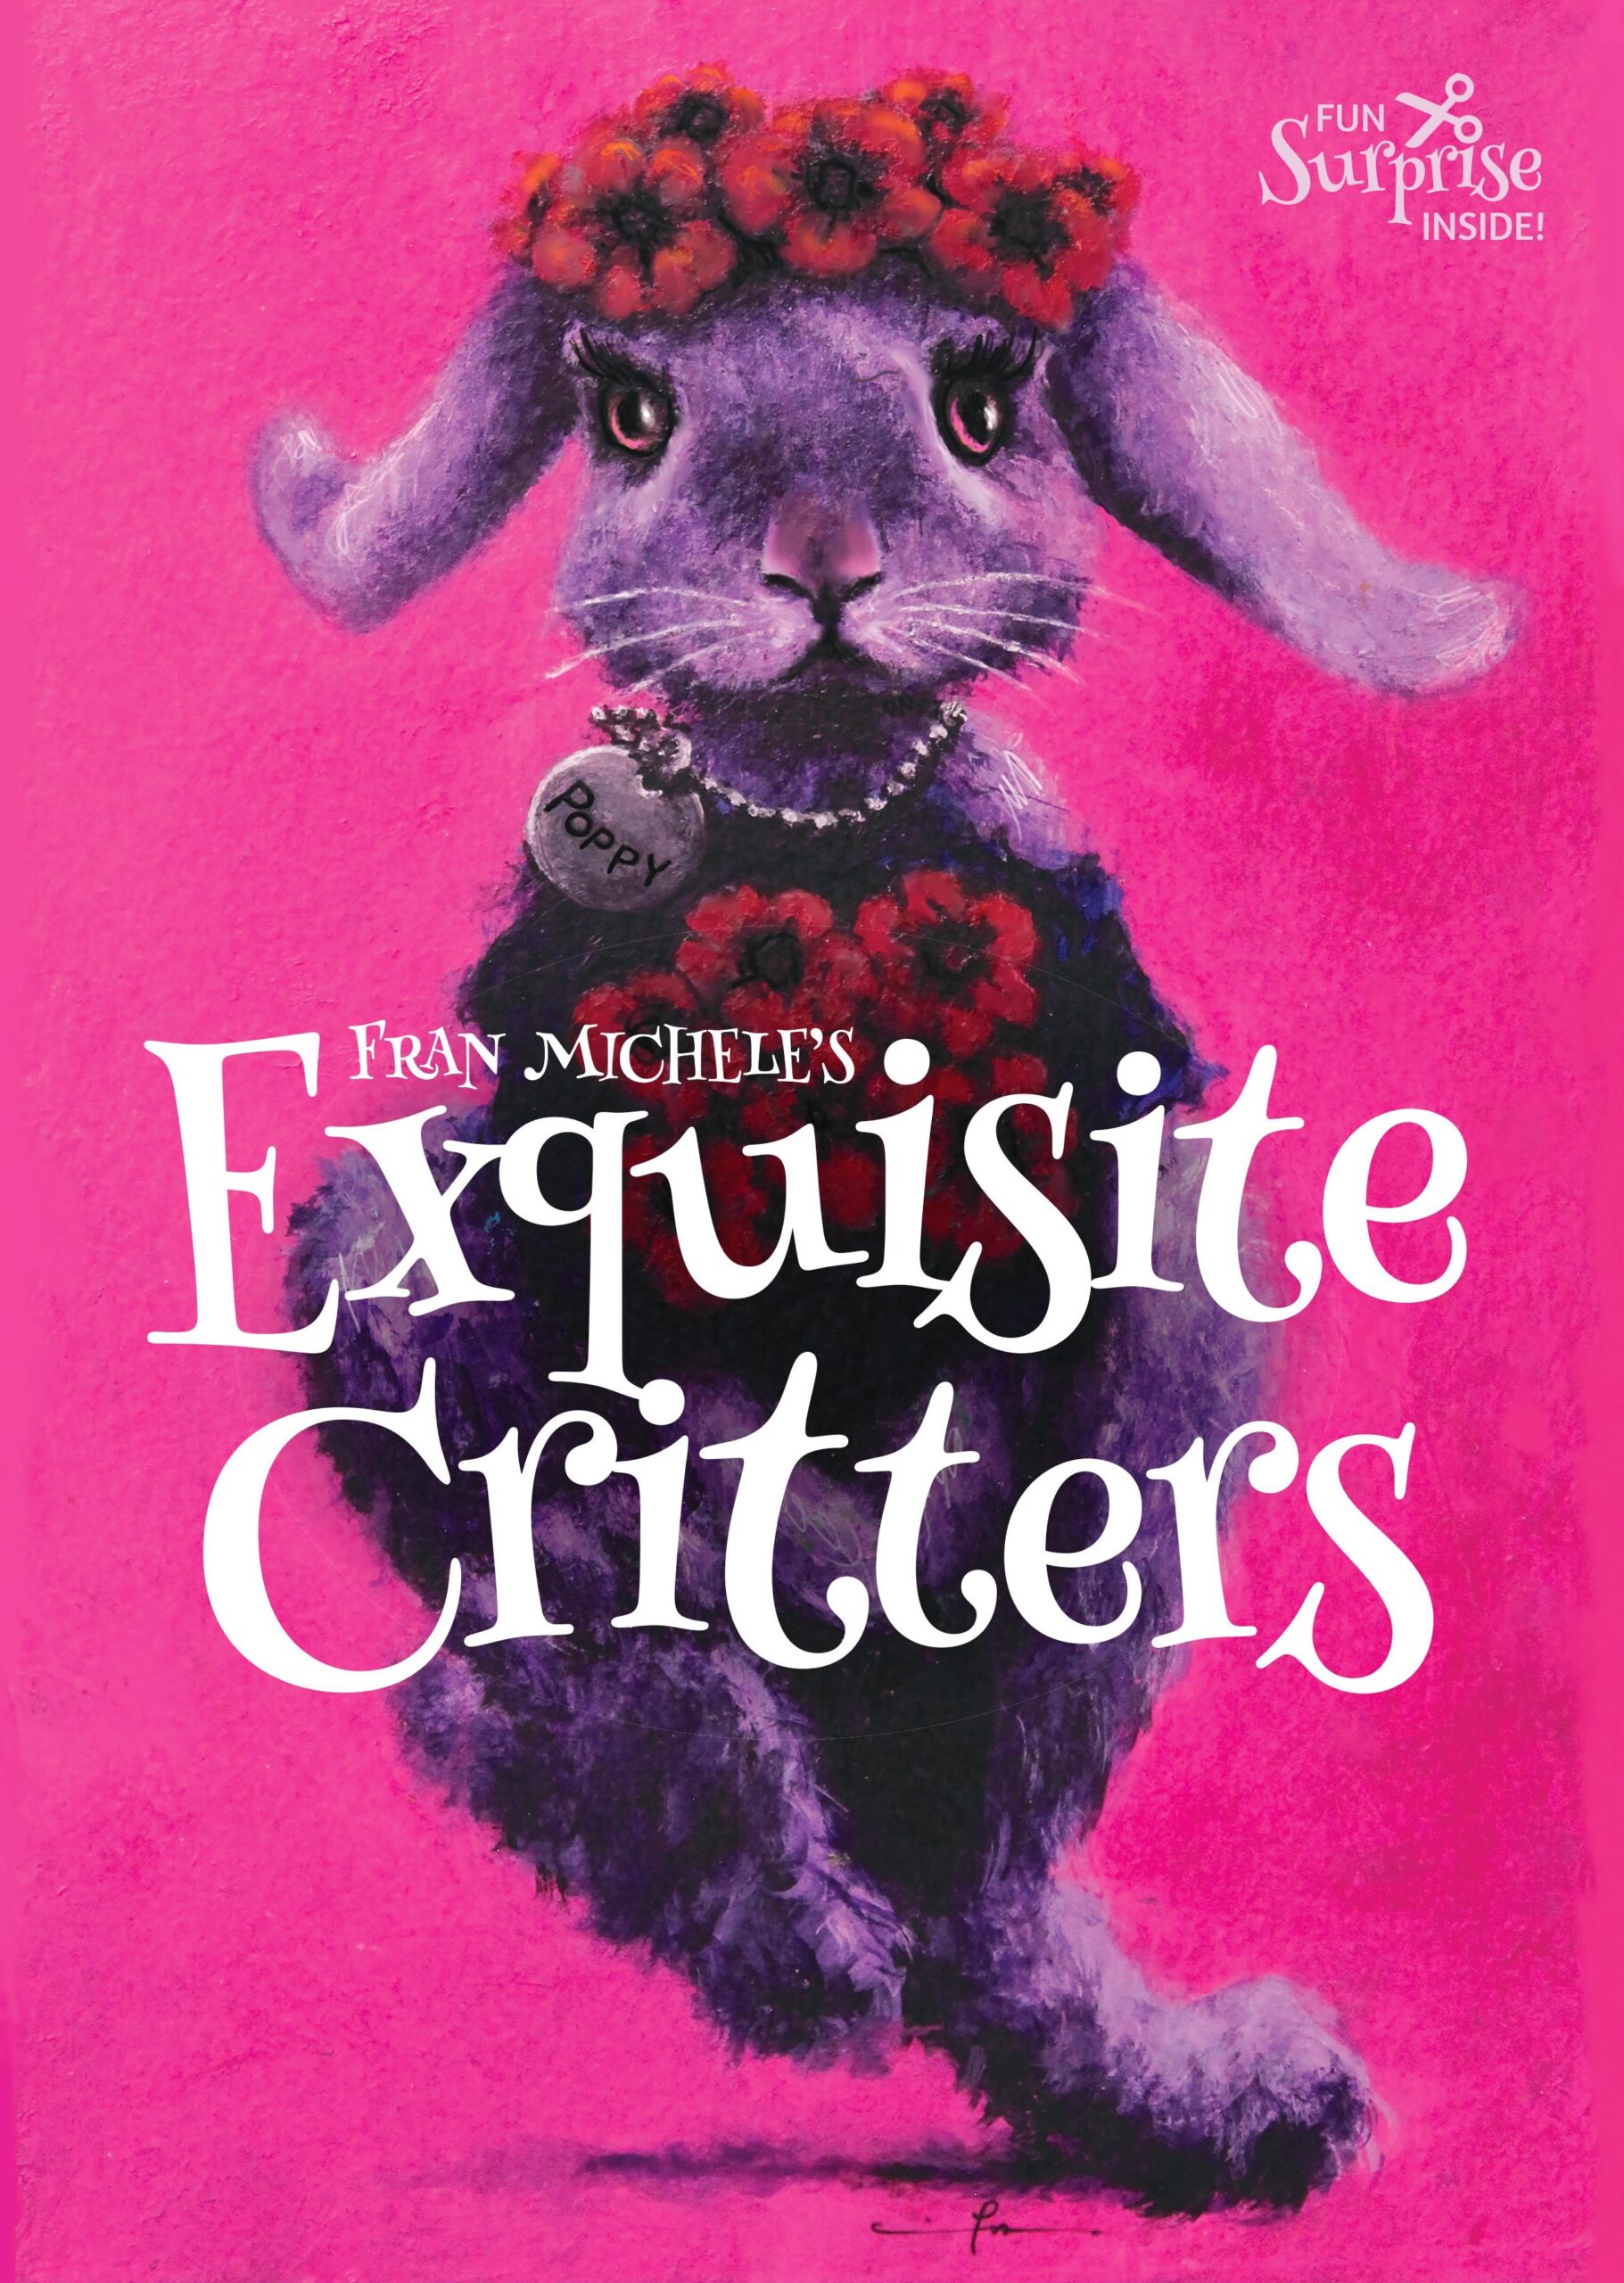 FREE: Exquisite Critters by Fran Michele